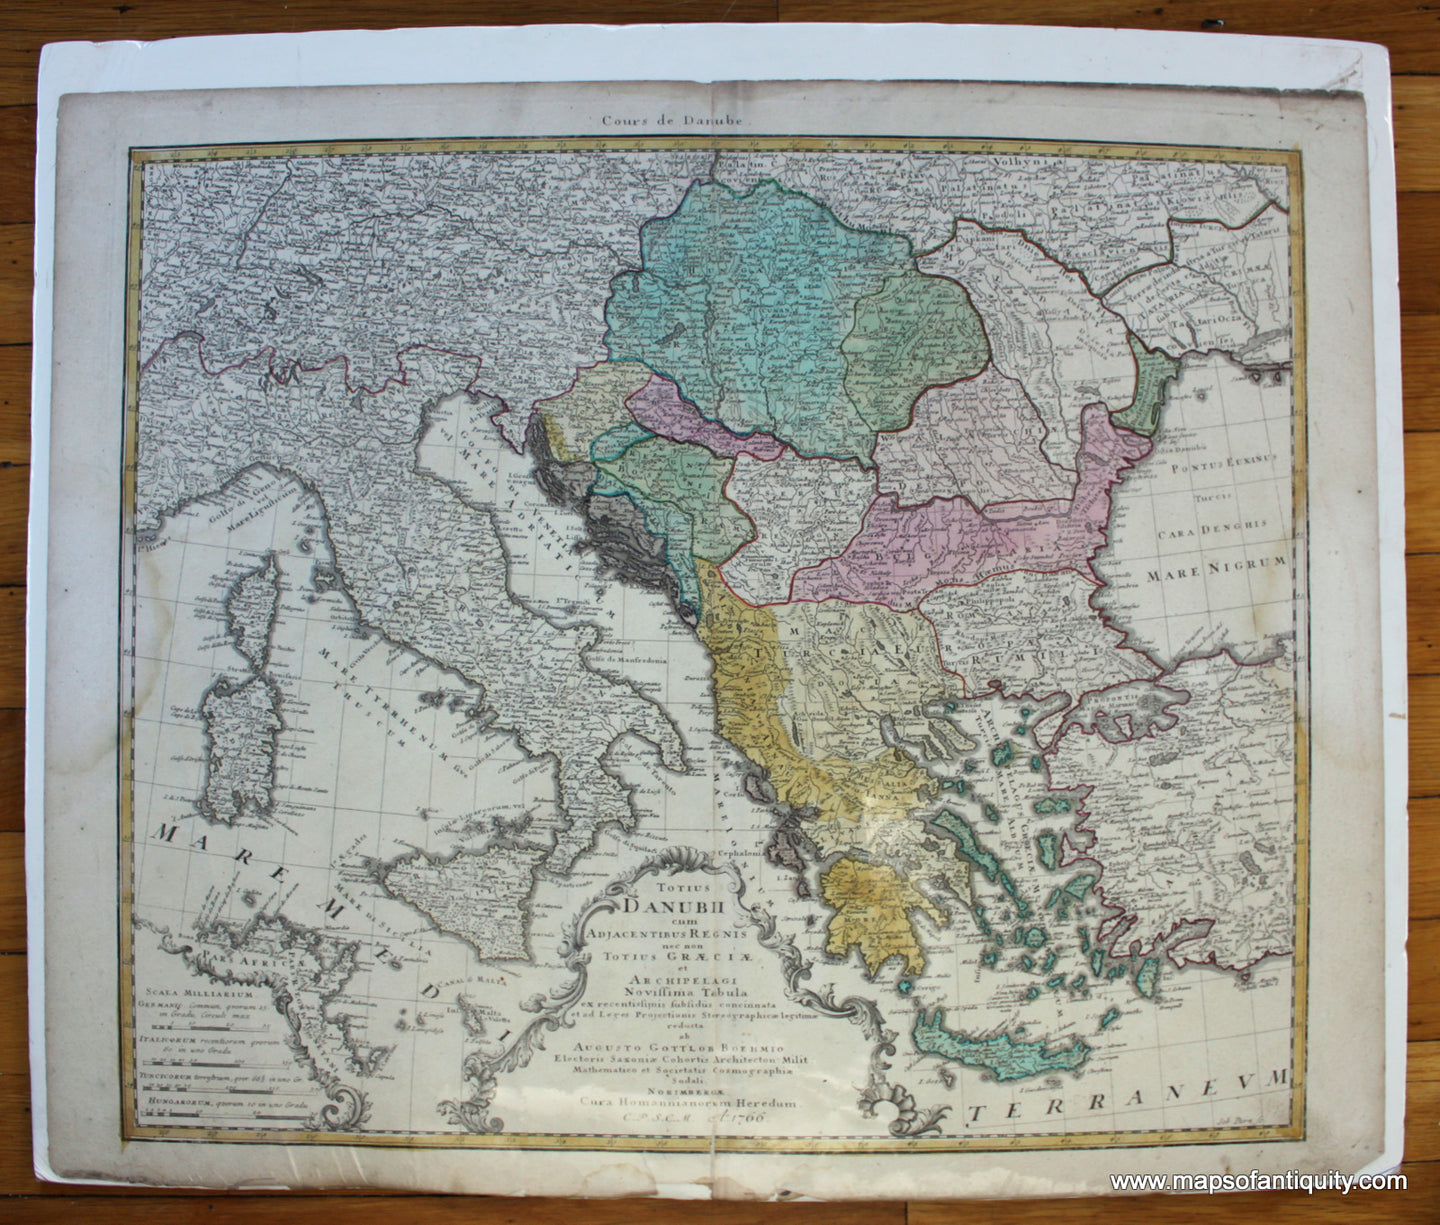 Antique-Hand-Colored-Map-Totius-Danubii-Europe-Greece-&-the-Balkans-Europe-General--1766-Homann-Maps-Of-Antiquity